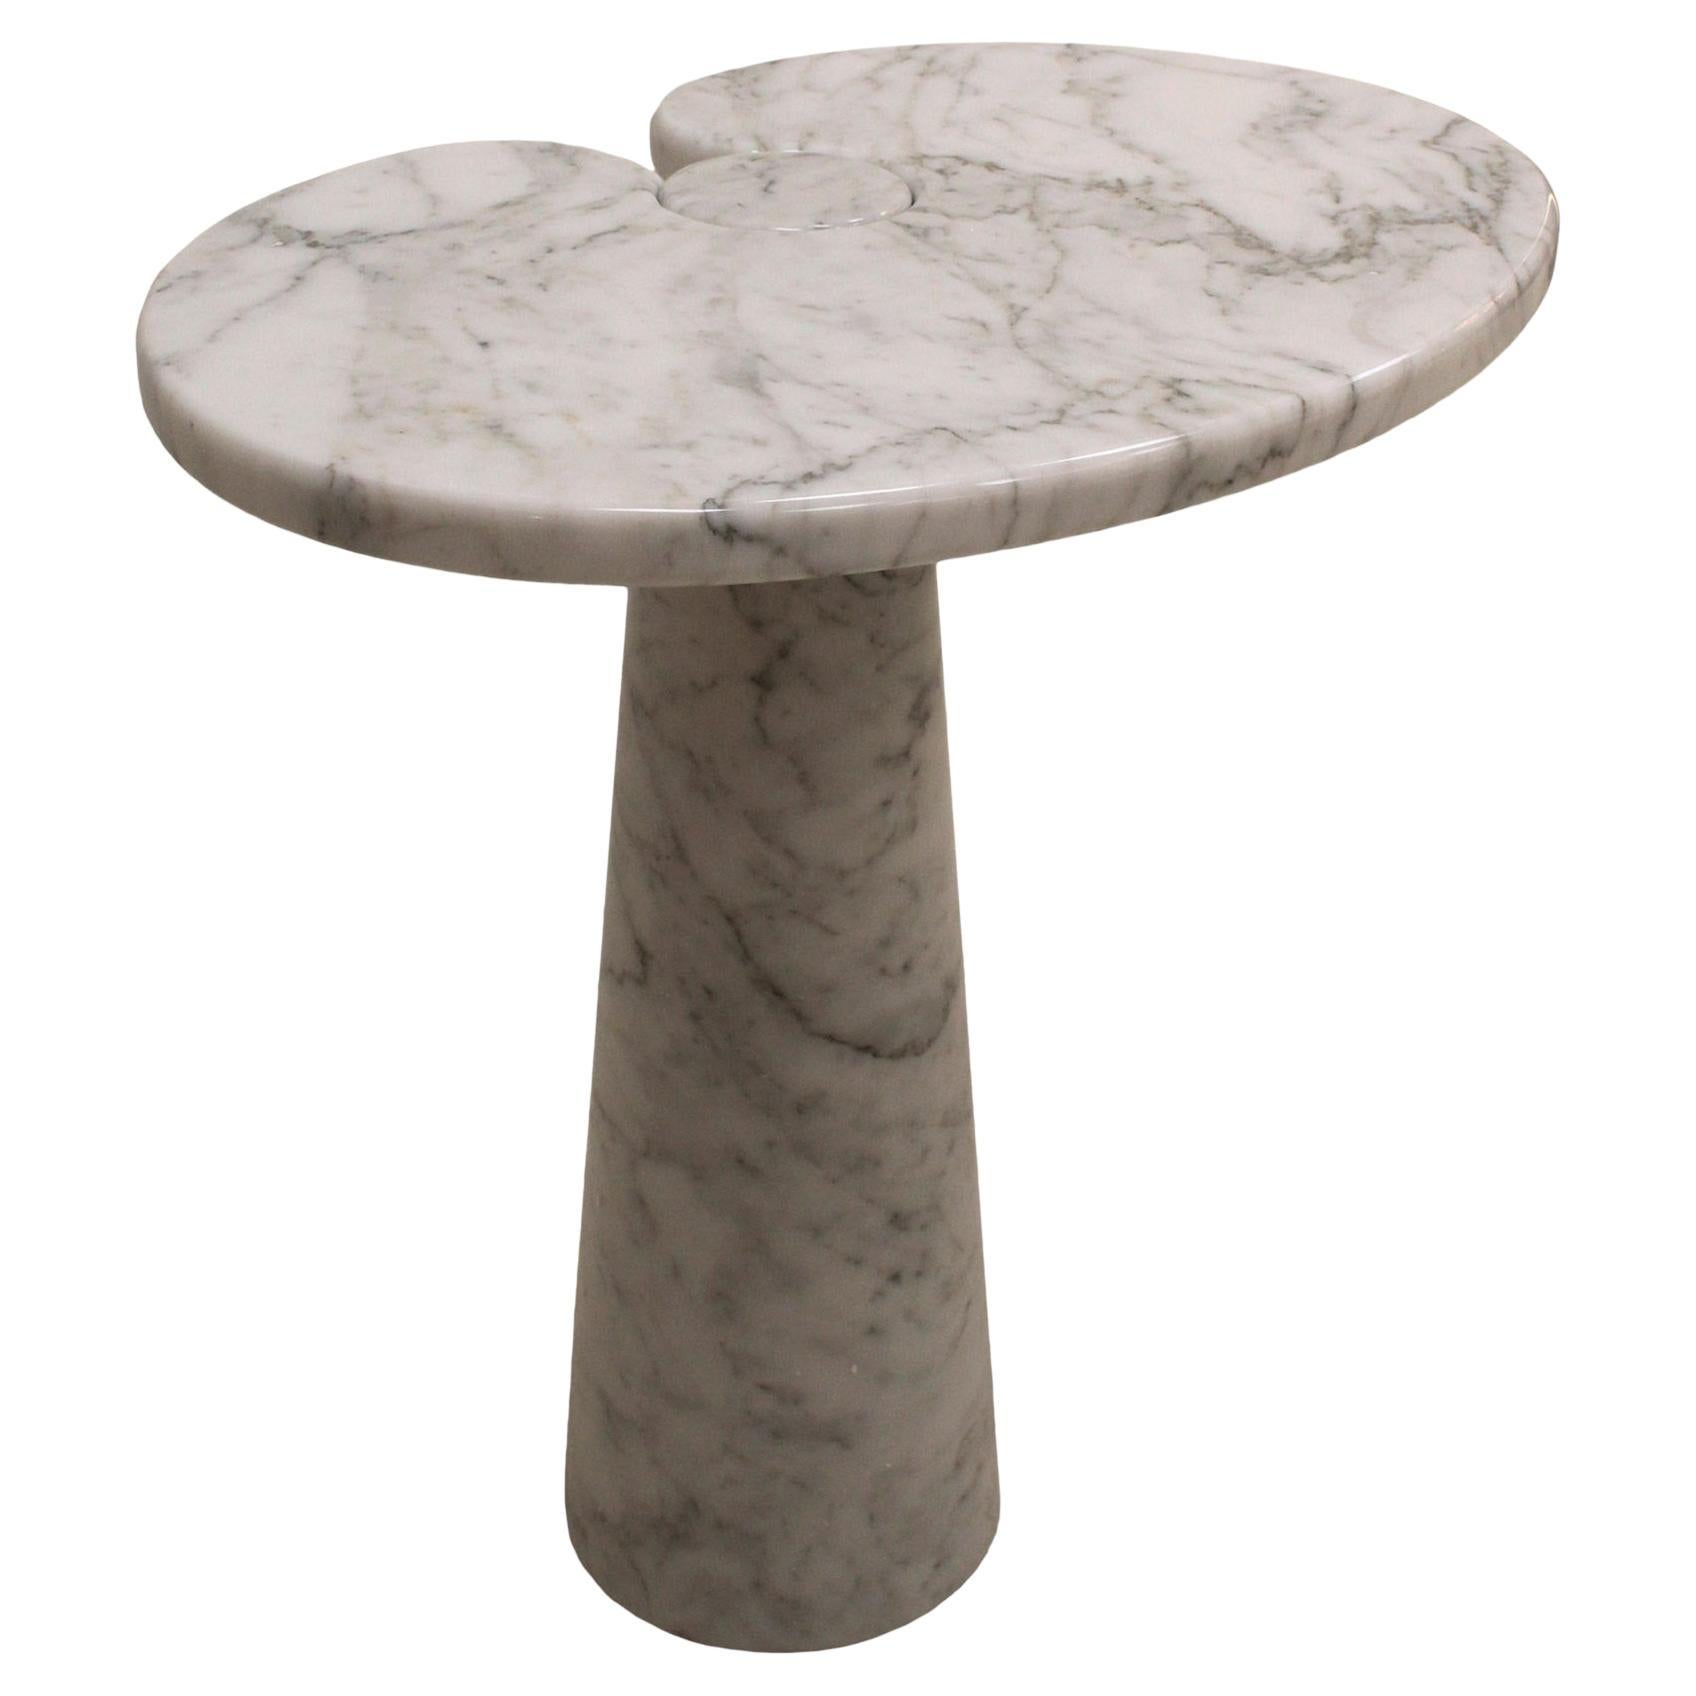 Arabescato marble side table designed by Angelo Mangiarotti. The table belong to the 